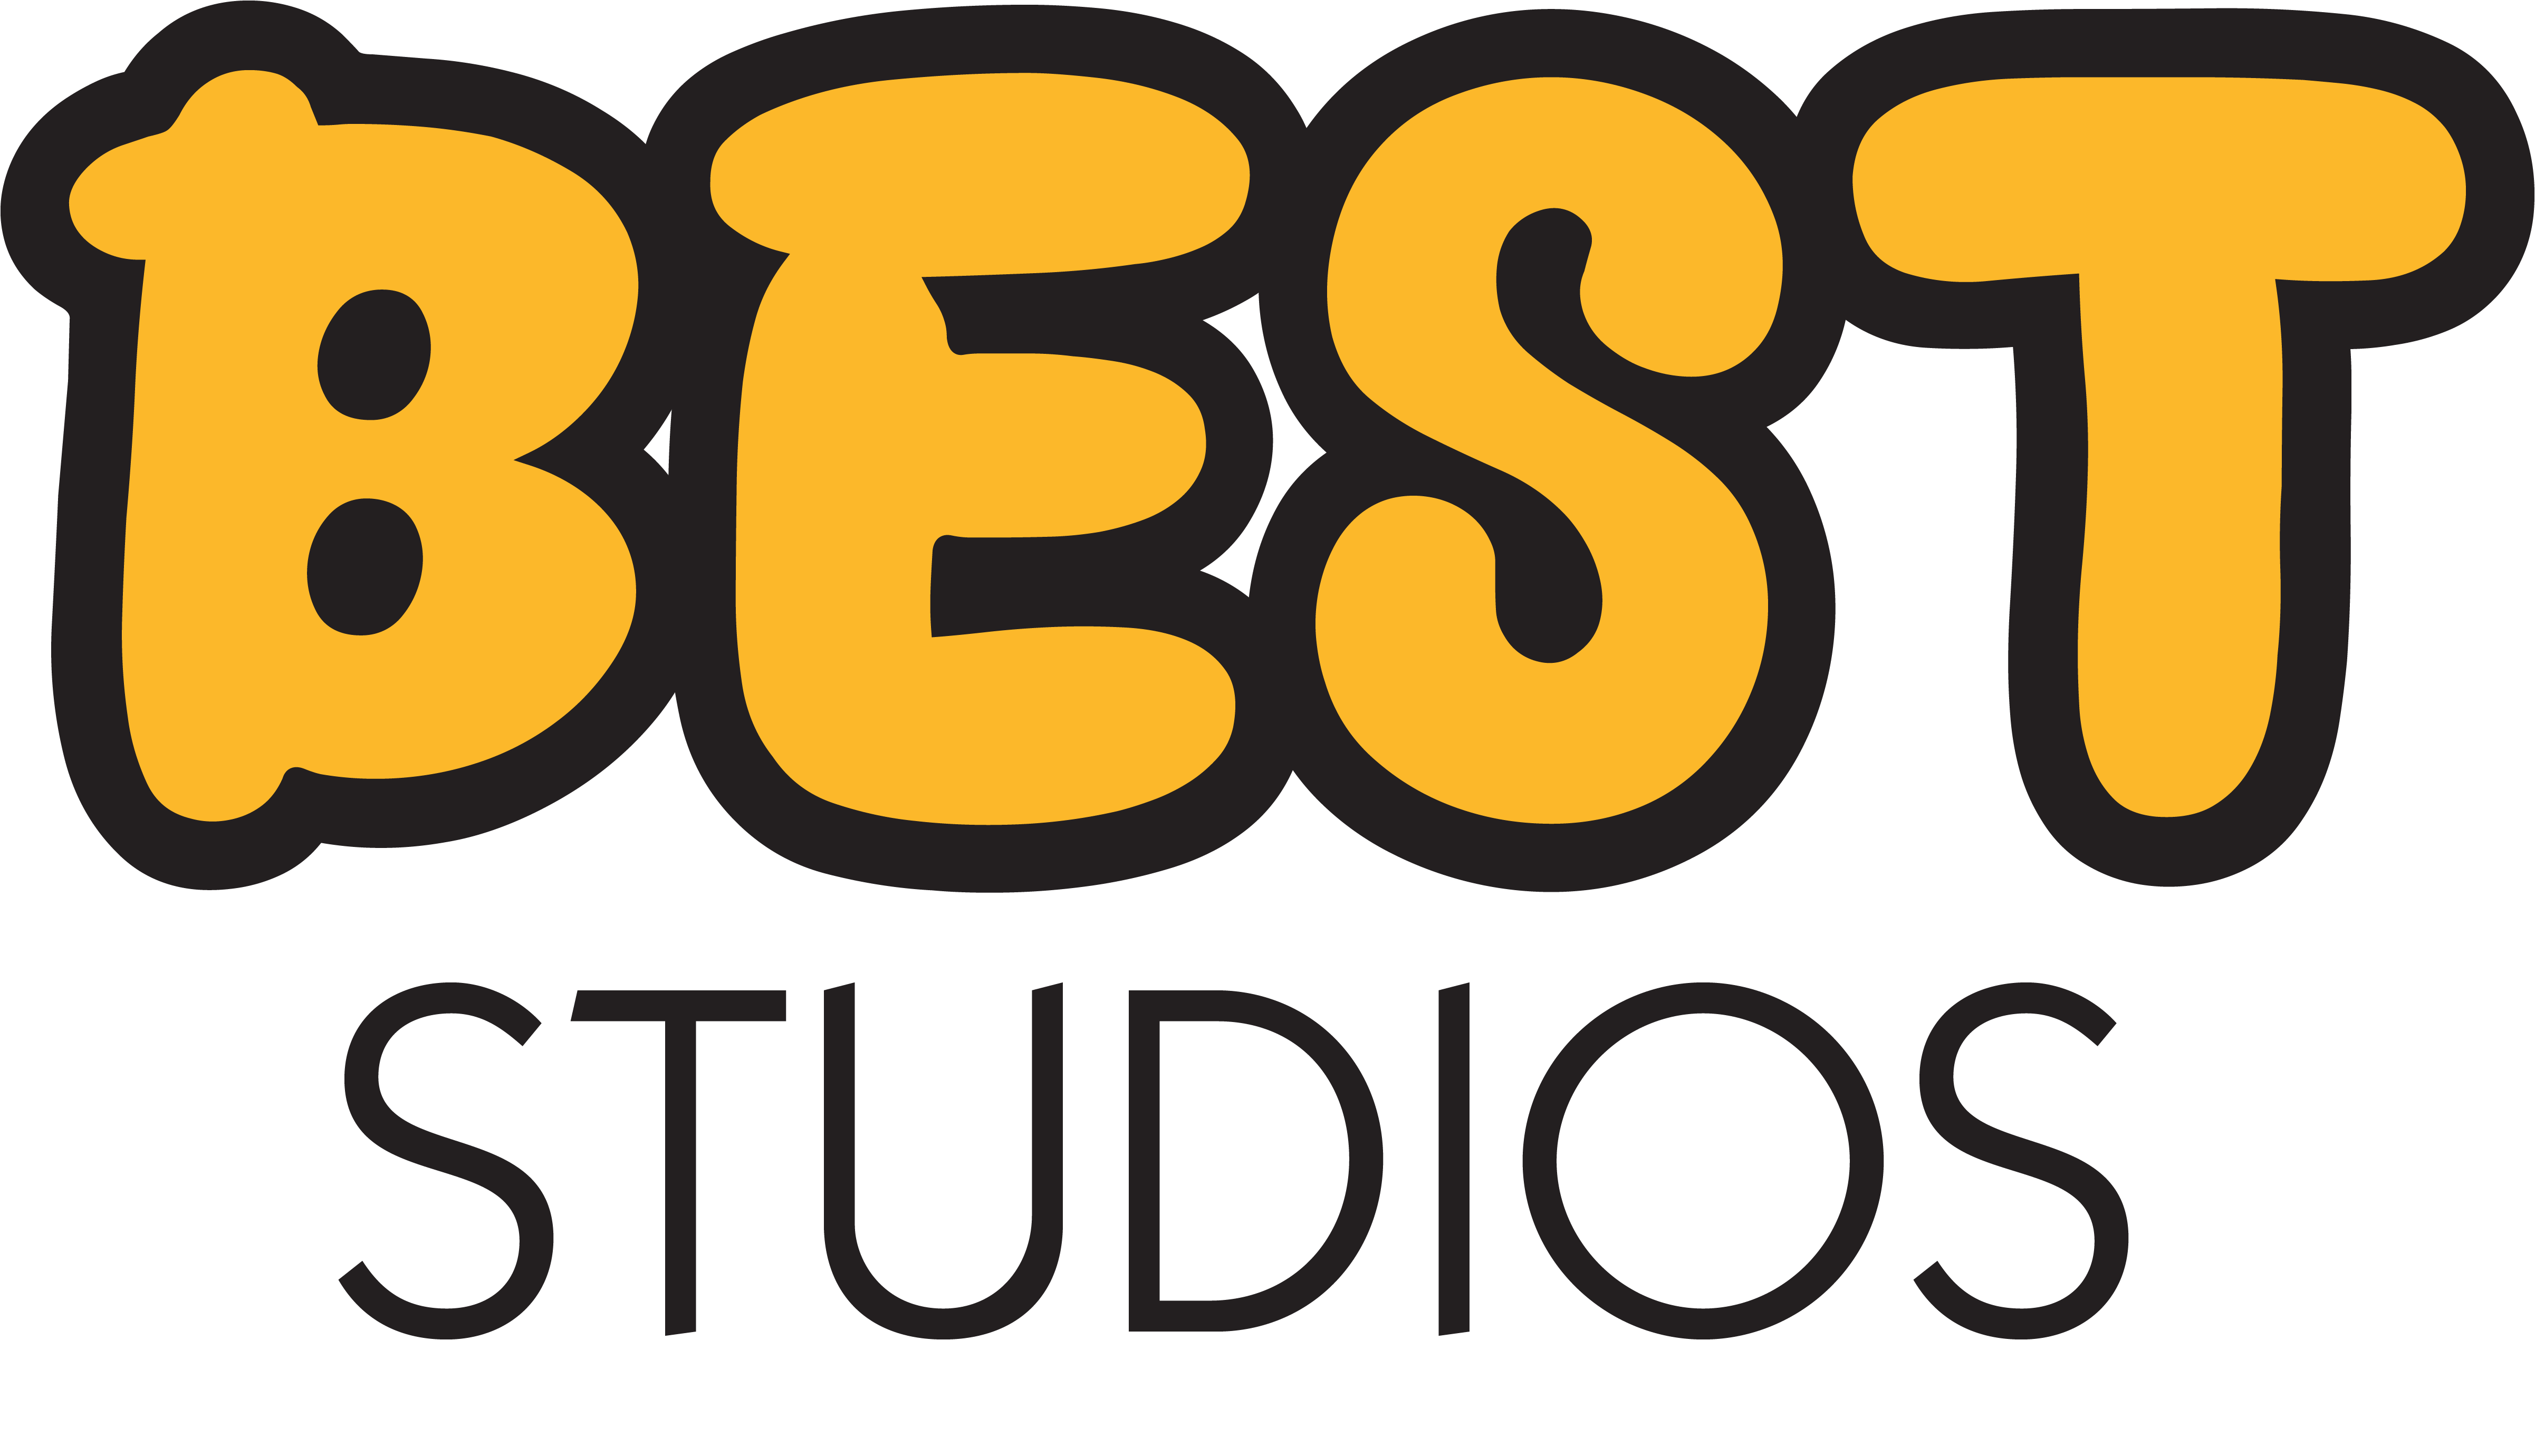 Best Studios profile on Qualified.One